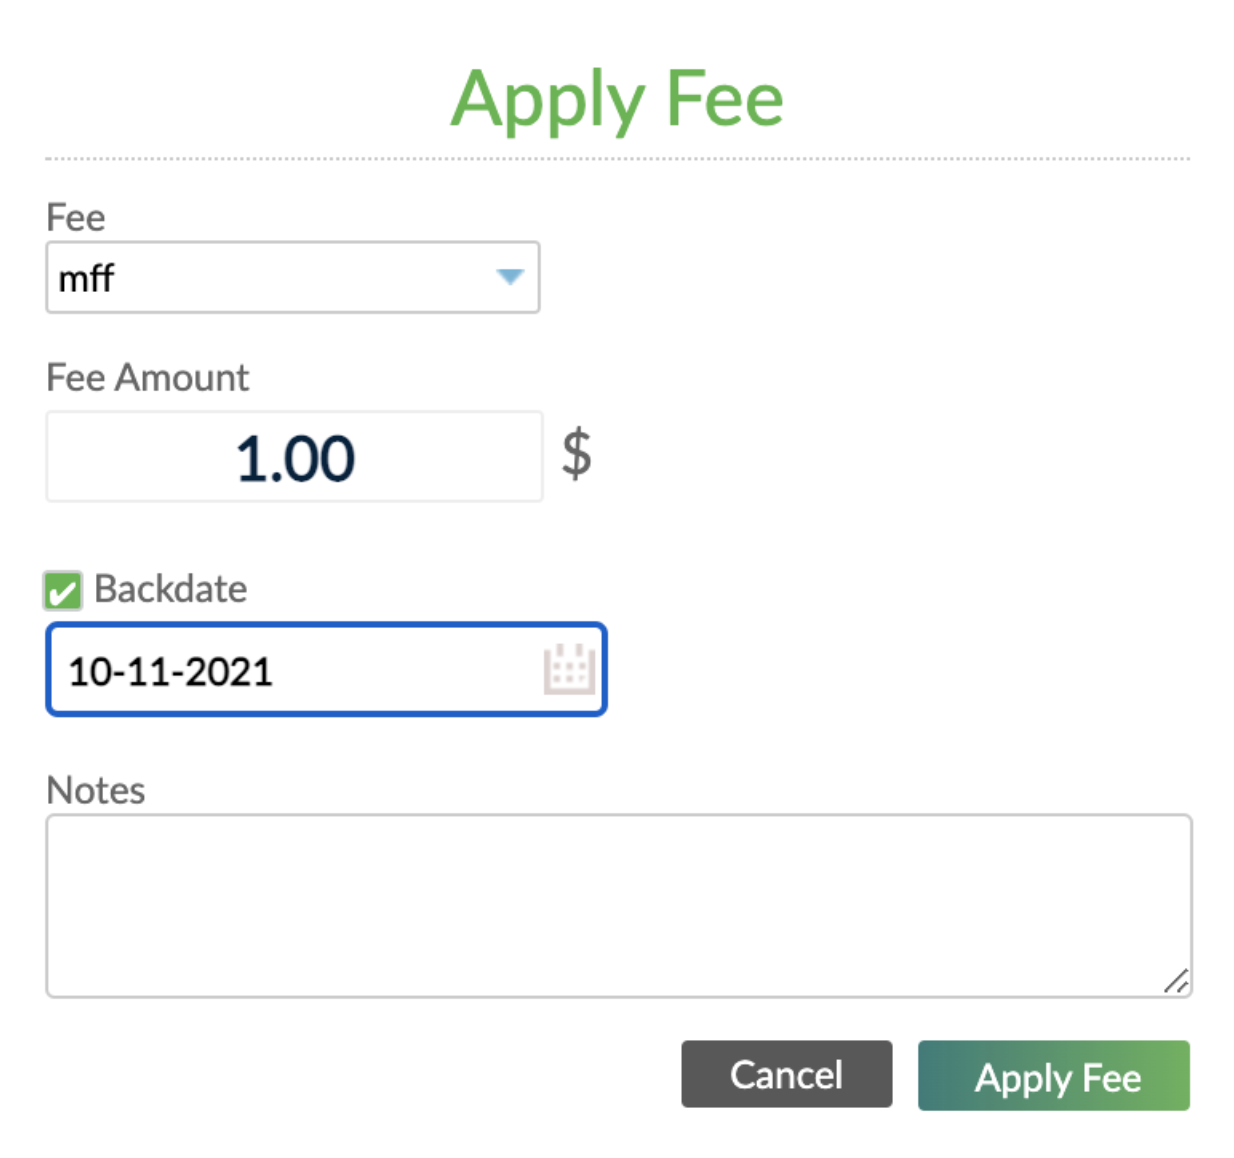 Apply Fee dialog with option to backdate the fee